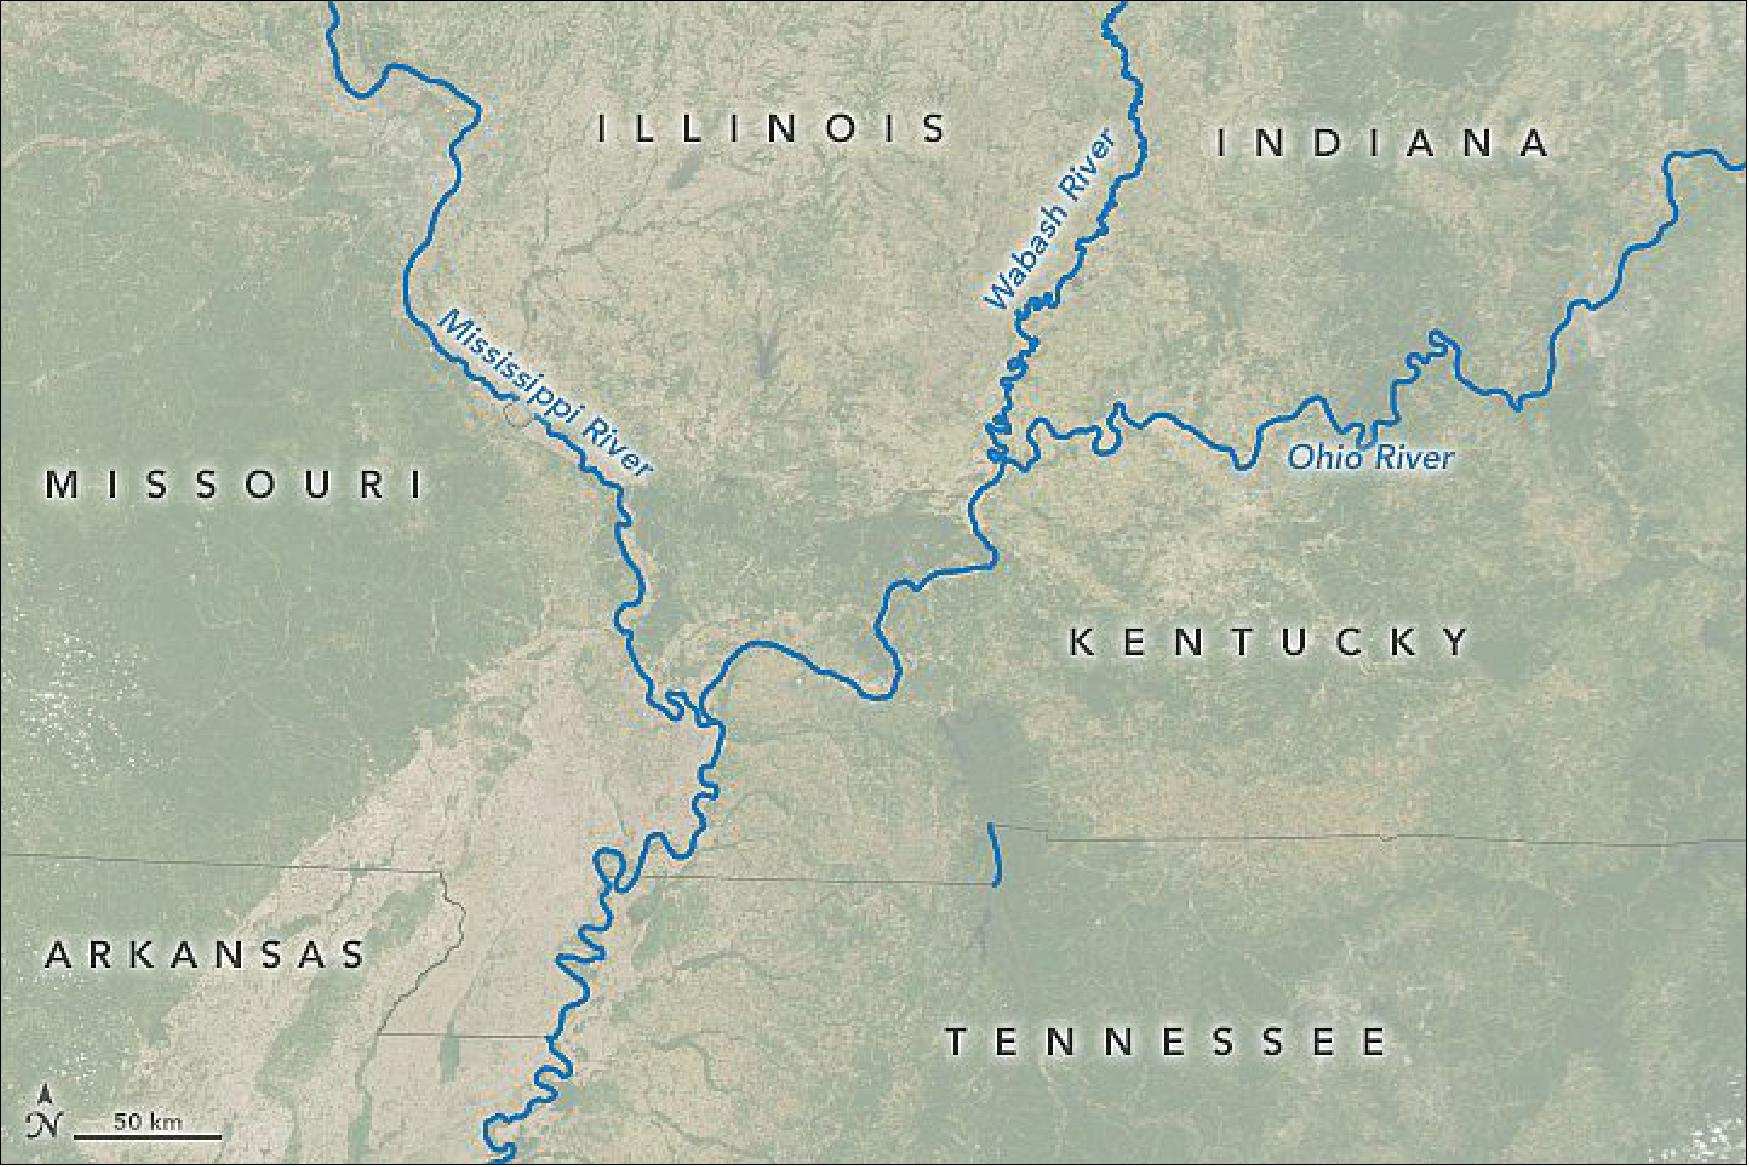 Figure 40: The MODIS instrument on NASA’s Terra satellite acquired an image of the confluence of the Mississippi and Ohio rivers, a place where Kentucky, Illinois, and Missouri come together in a tripoint. A few hundred kilometers upstream there is another tripoint where the Wabash River joins the Ohio River and Kentucky, Illinois, and Indiana come together (image credit: NASA Earth Observatory)